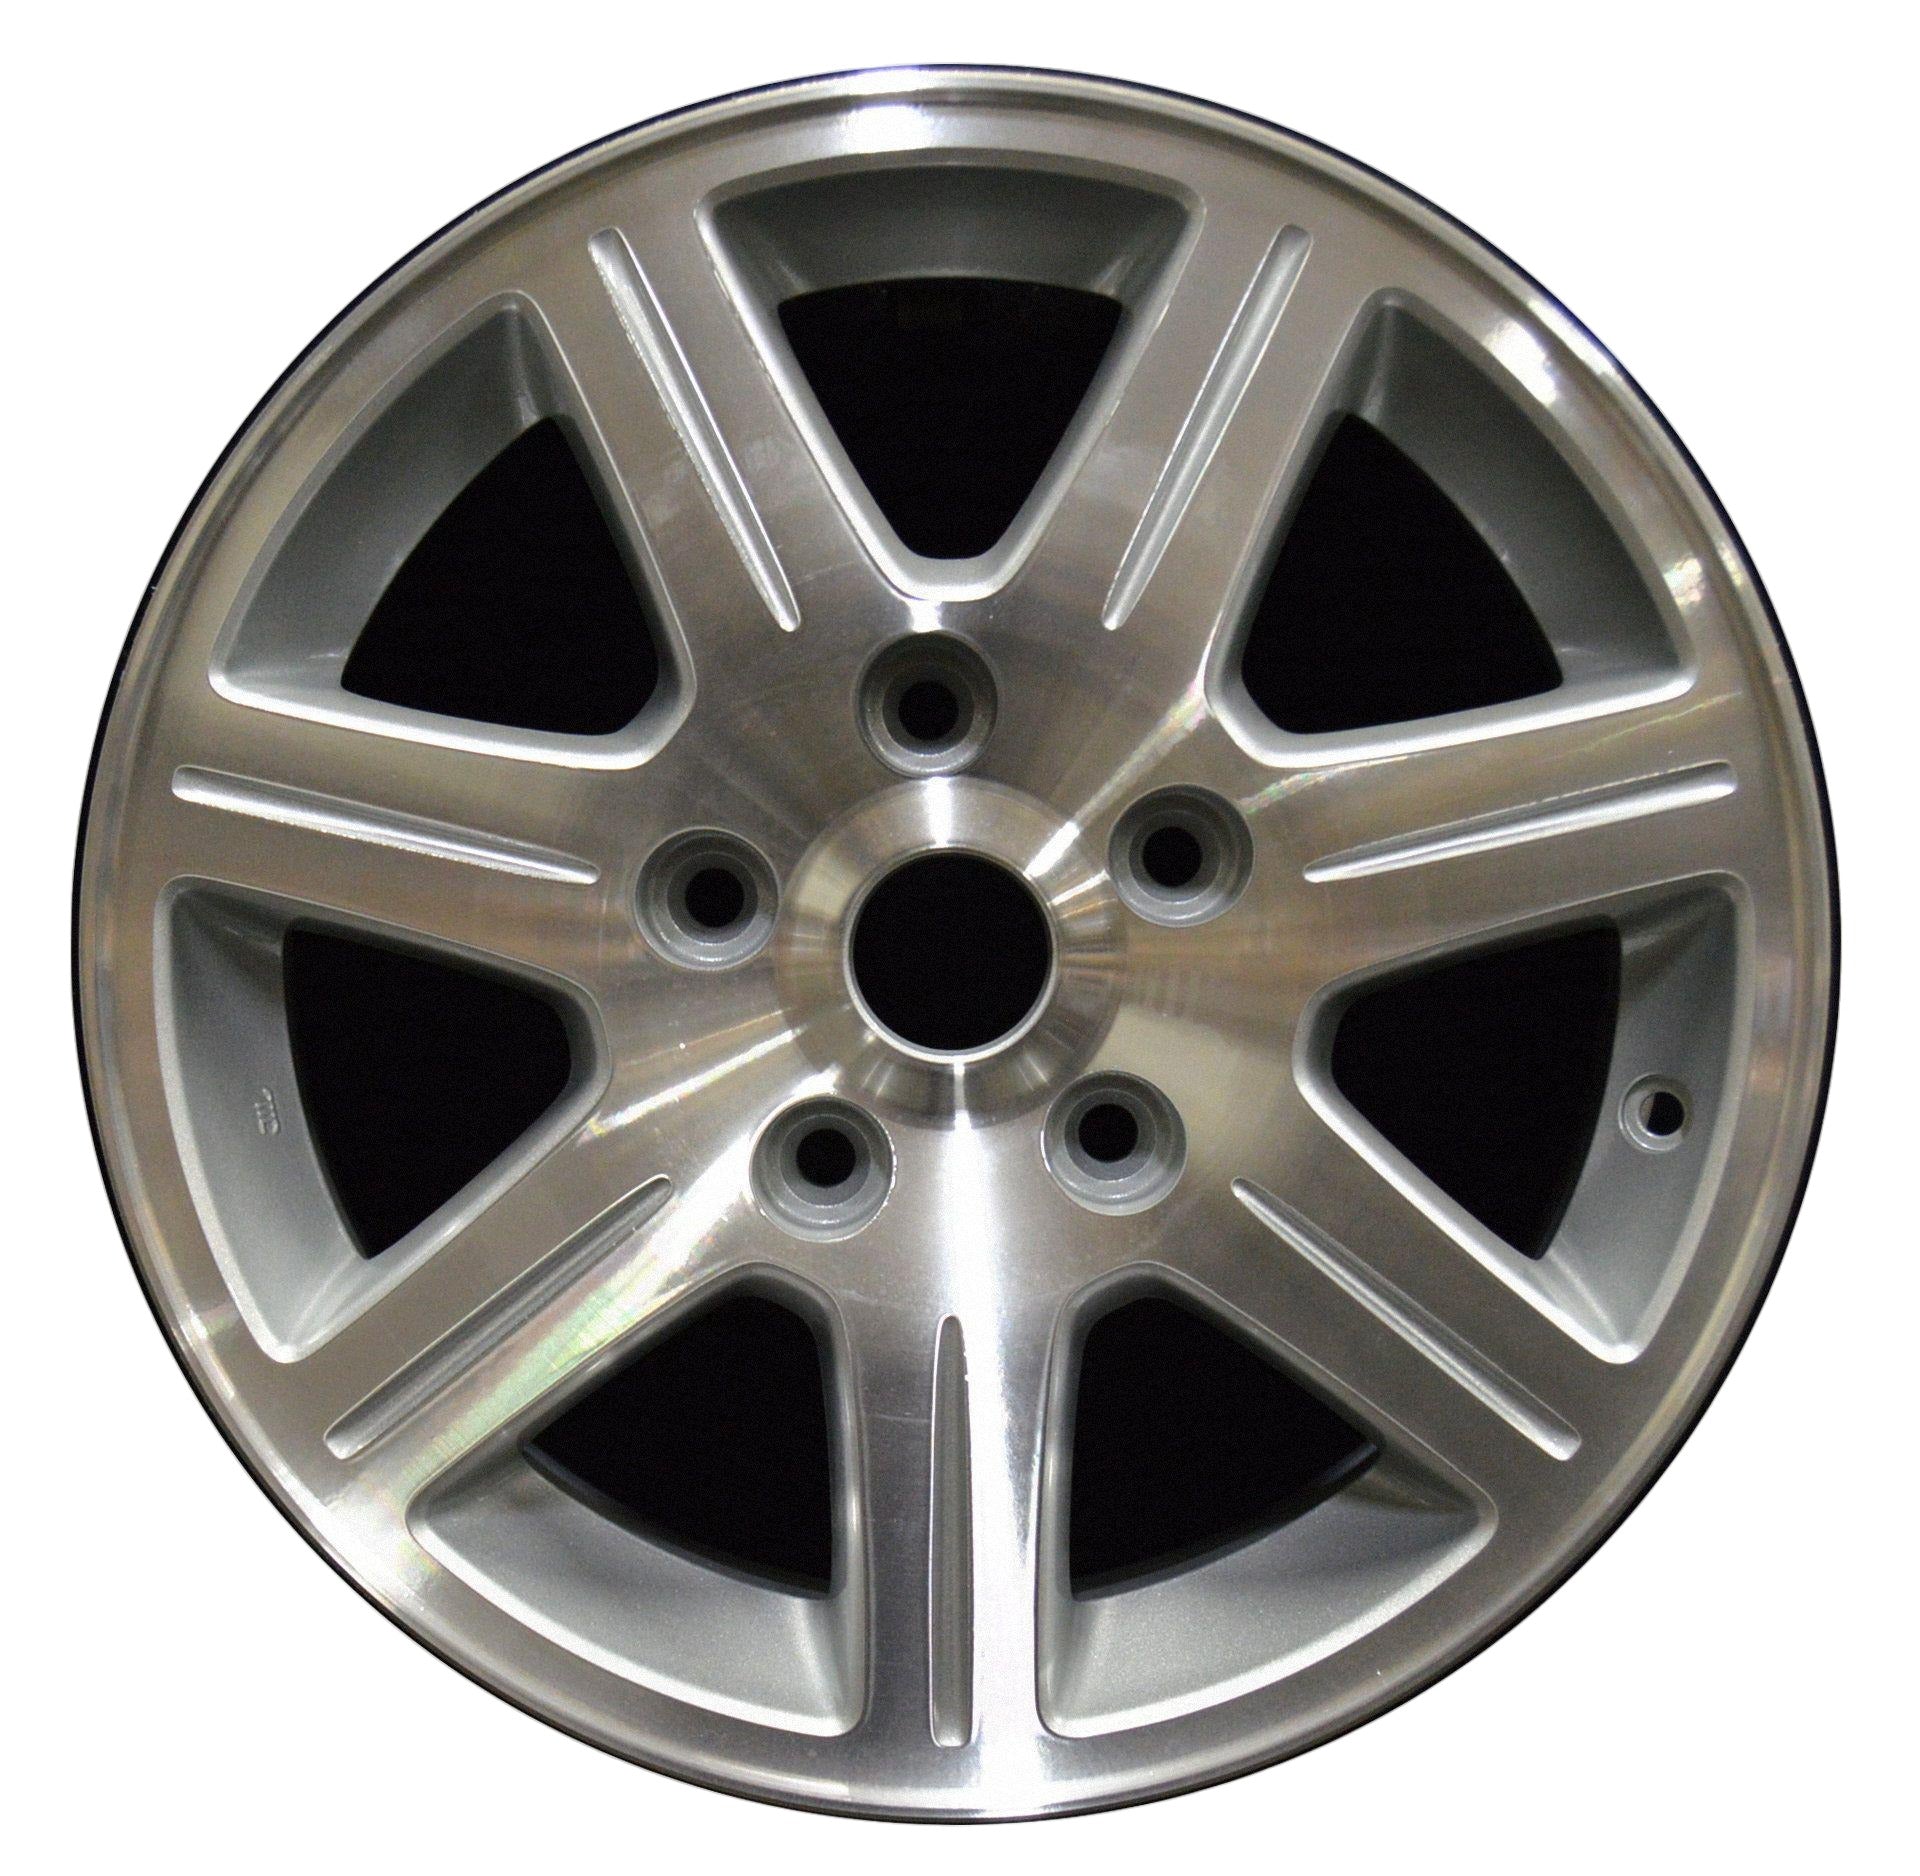 Chrysler Town & Country  2008, 2009, 2010 Factory OEM Car Wheel Size 16x6.5 Alloy WAO.2330.PS01.MA